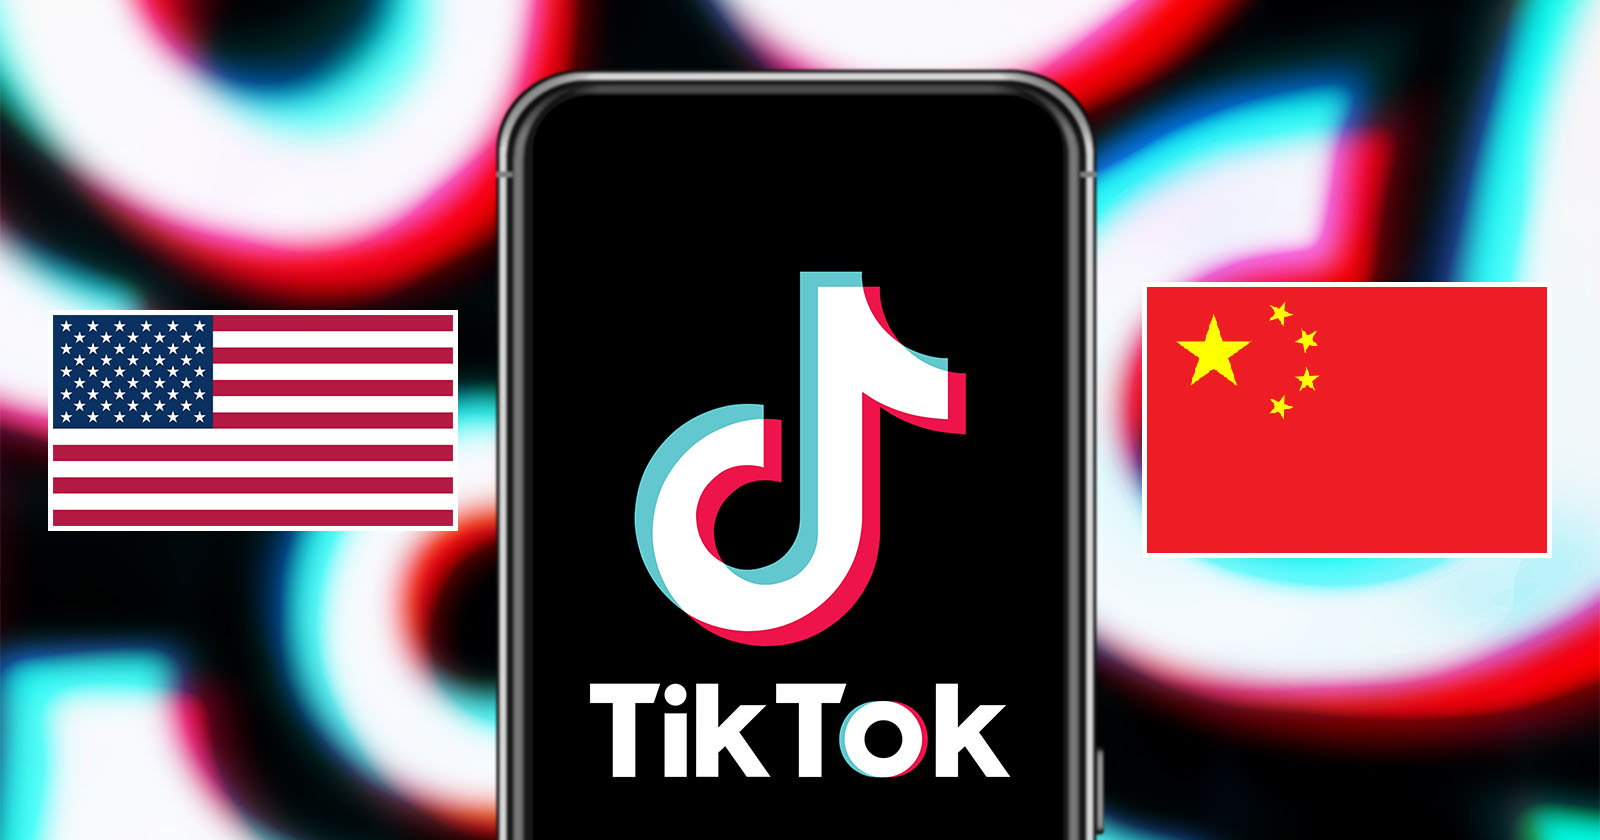  house passes tiktok ban bill what means 